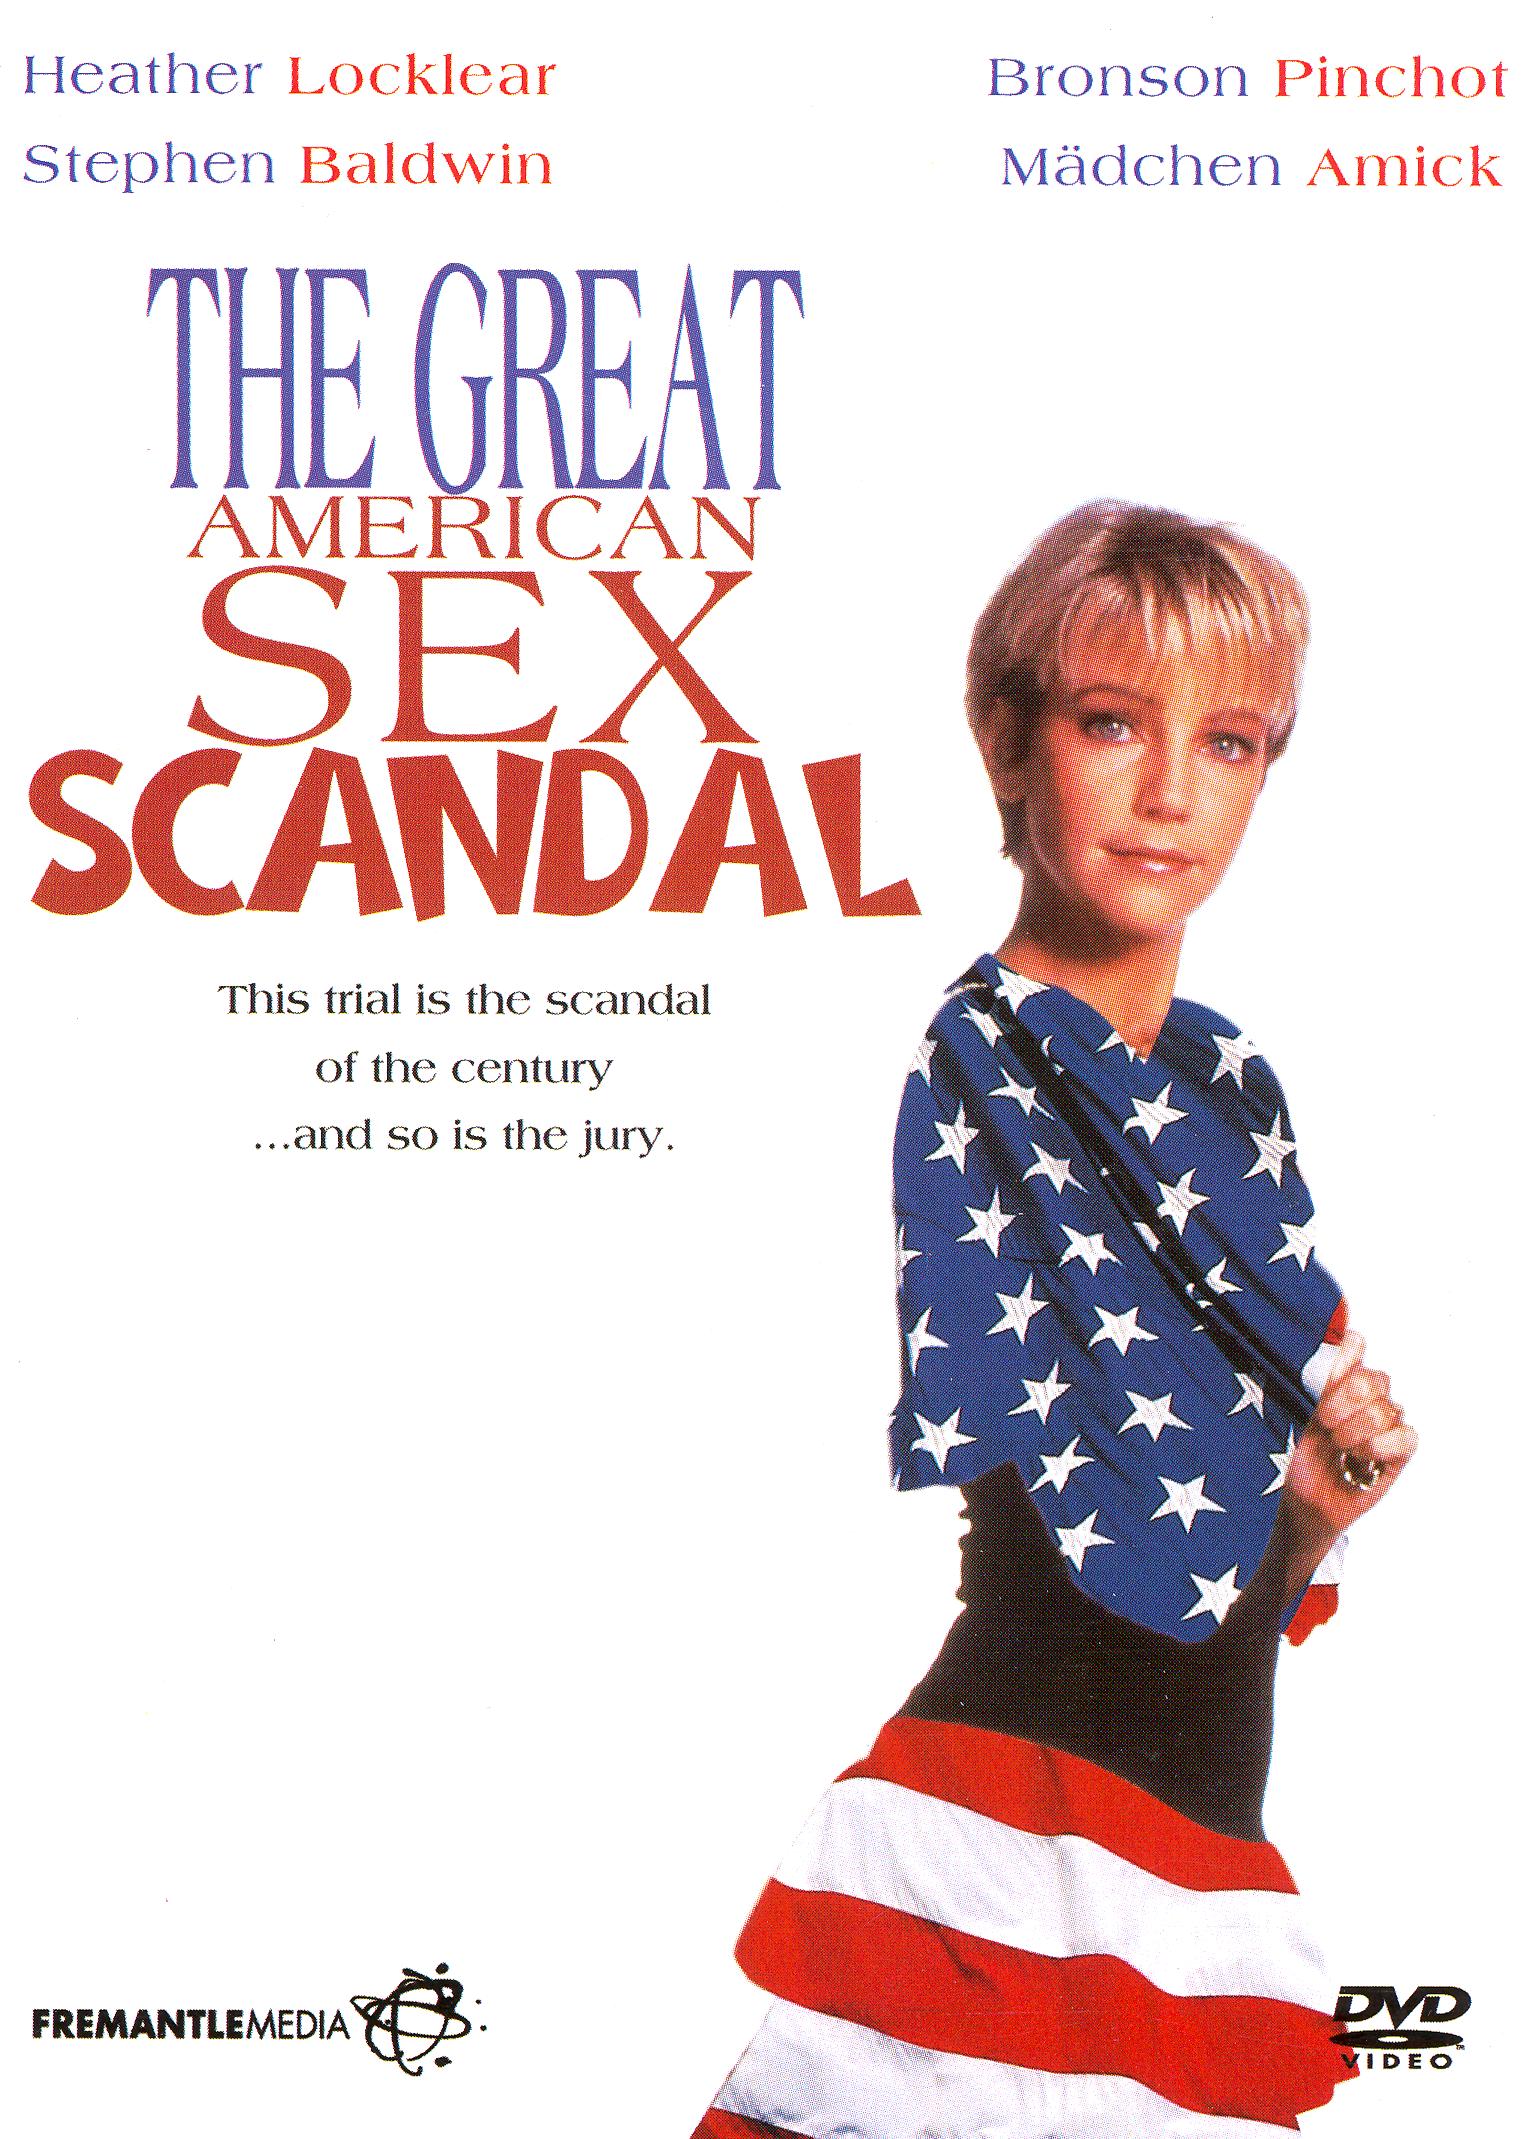 The Great American Sex Scandal 1990 Michael Schultz Synopsis Characteristics Moods 